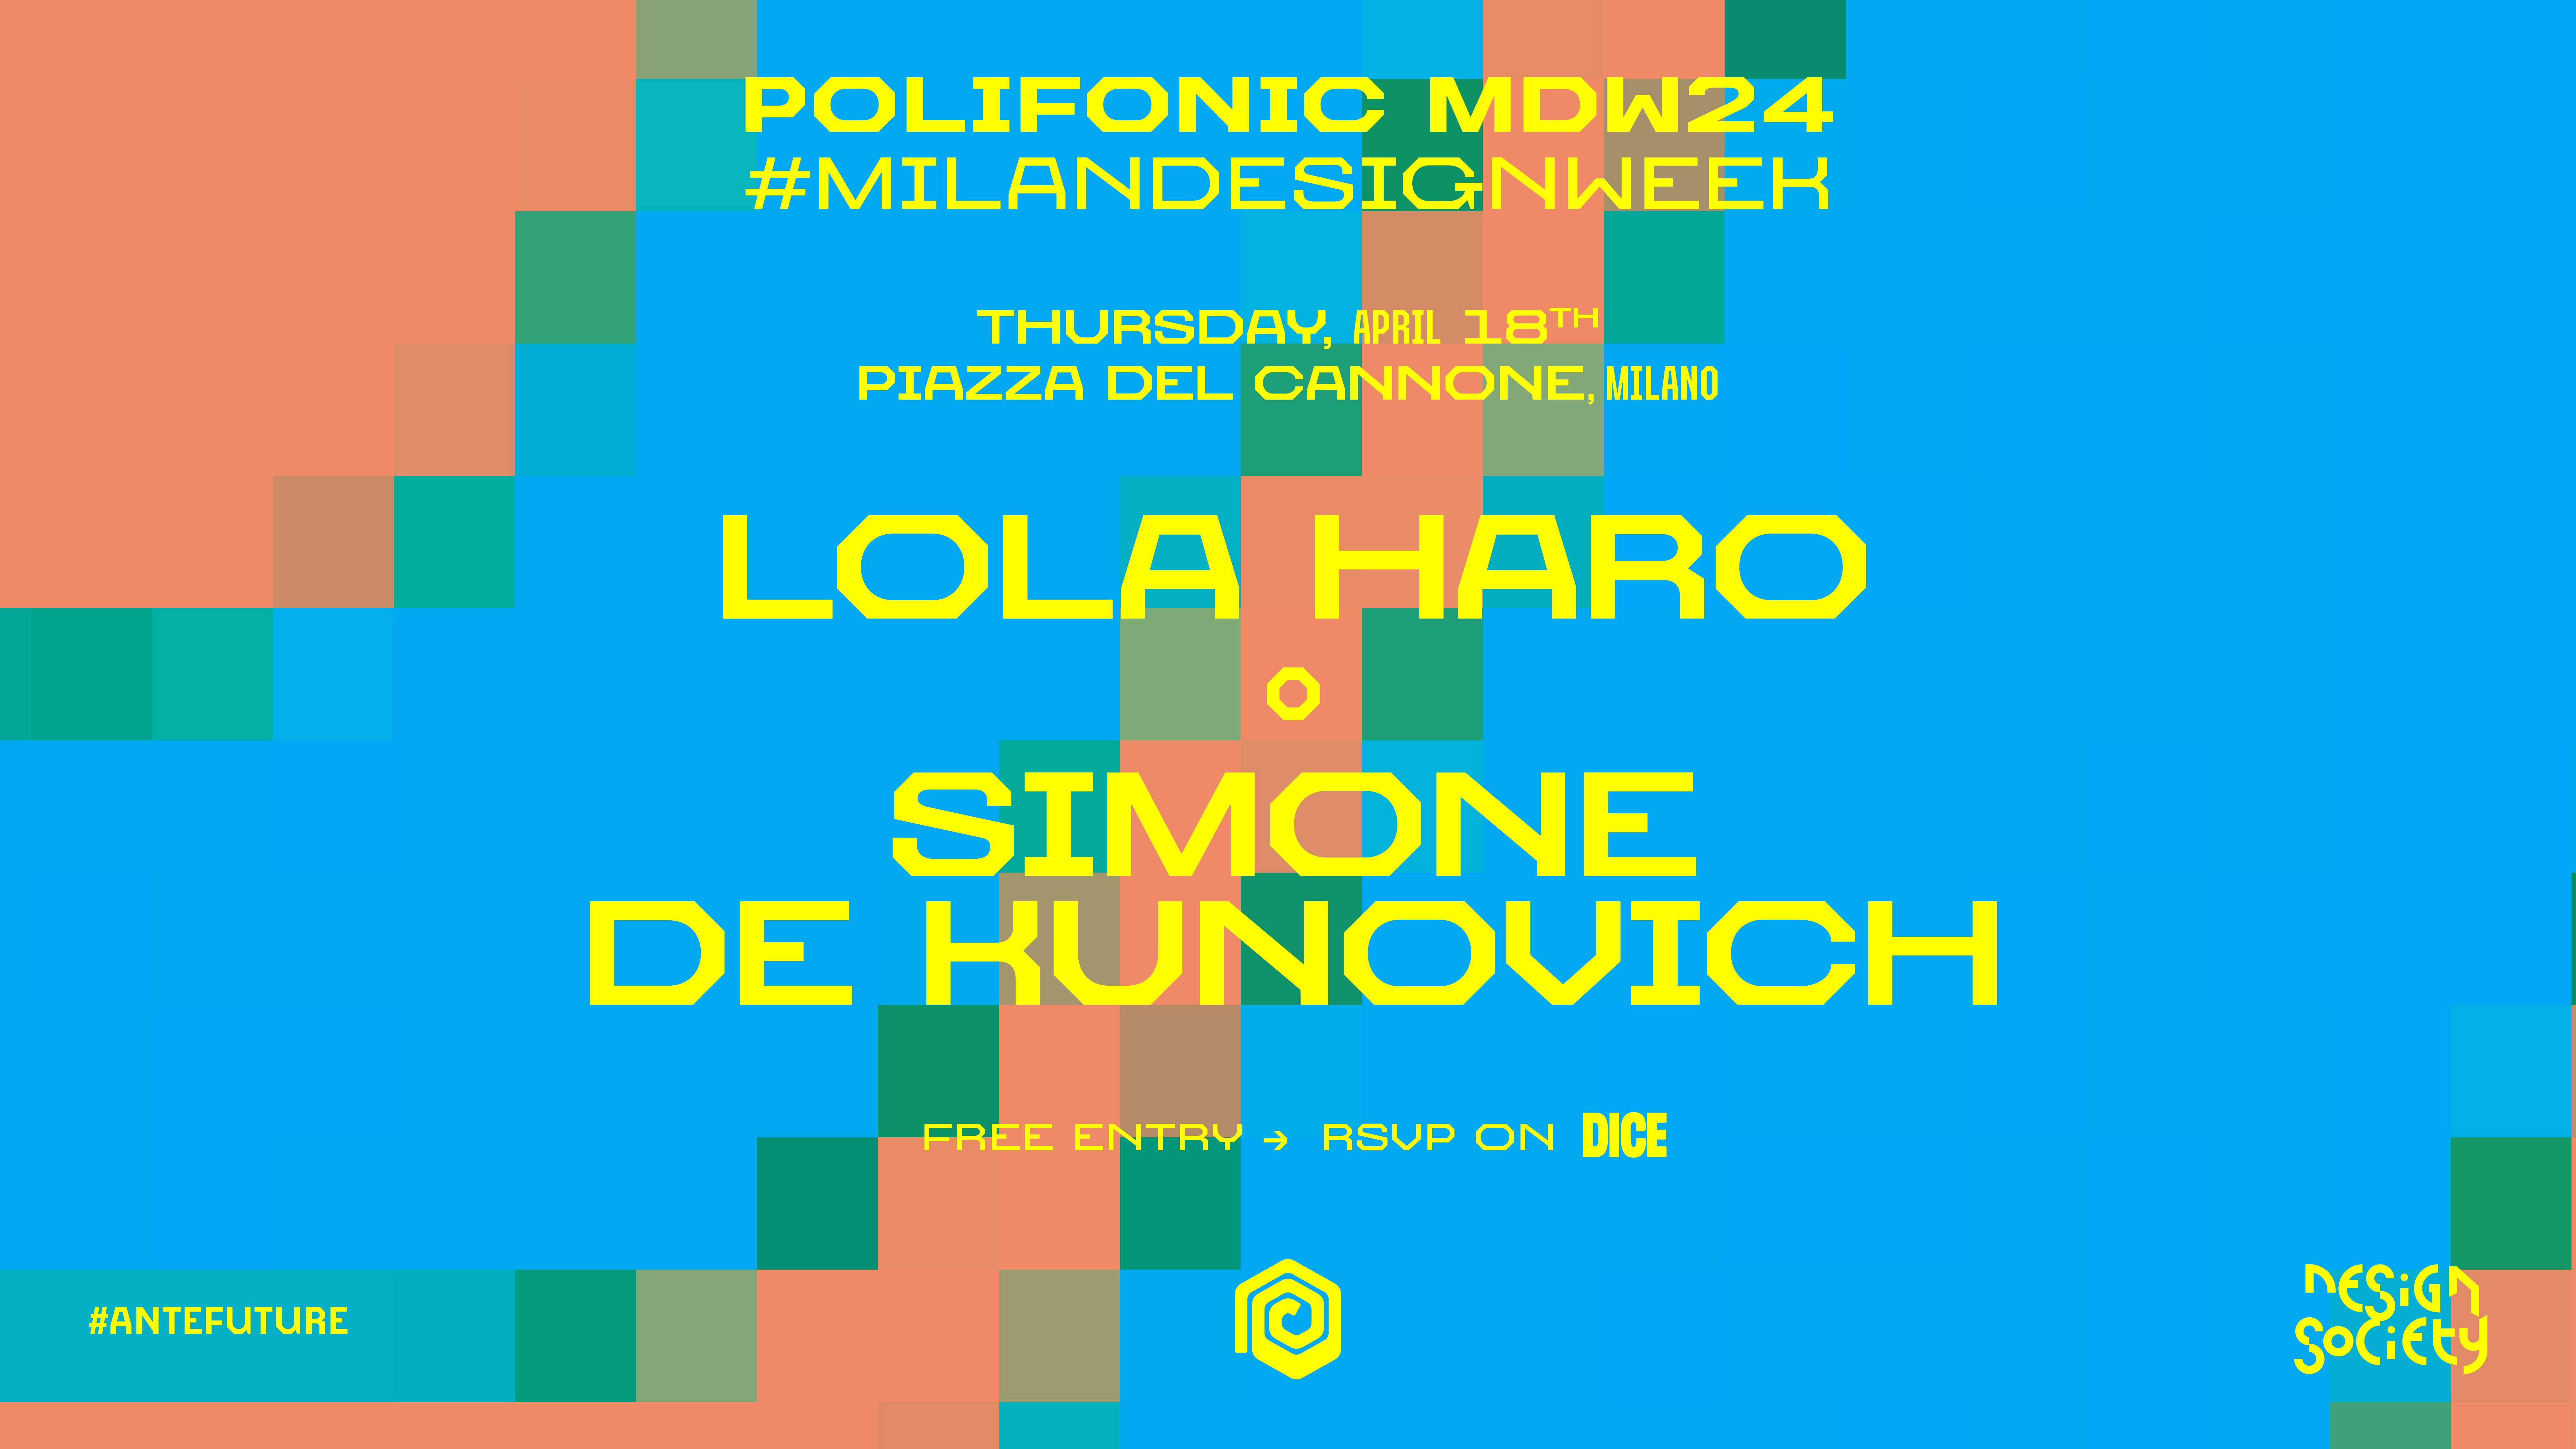 Polifonic MDW24 with Lola Haro - Piazza del Cannone - フライヤー表